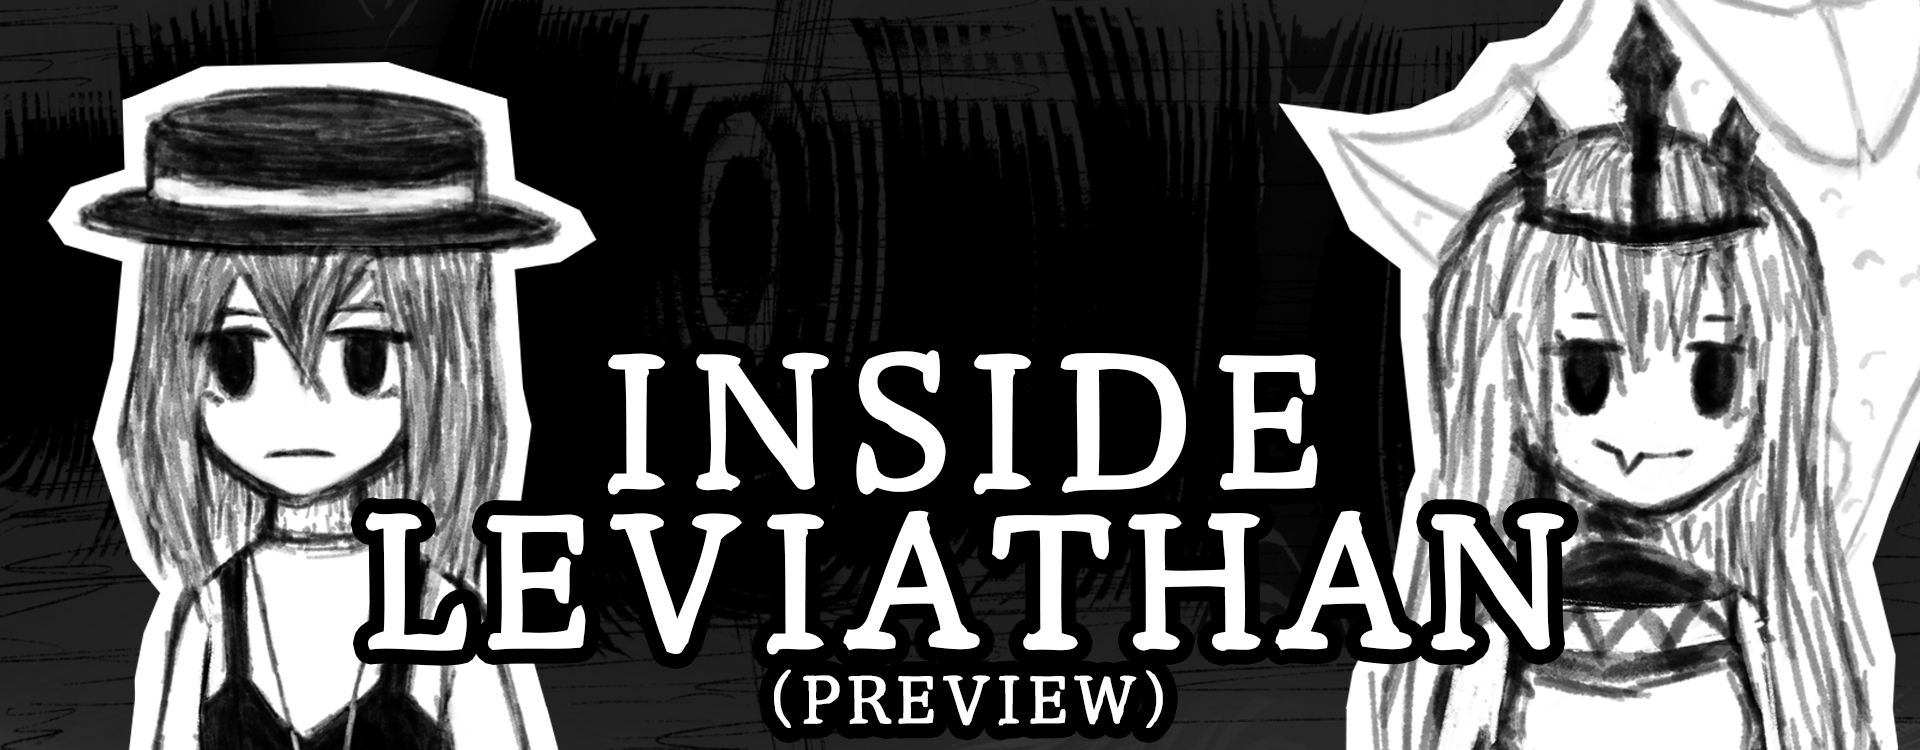 Inside Leviathan (Preview)